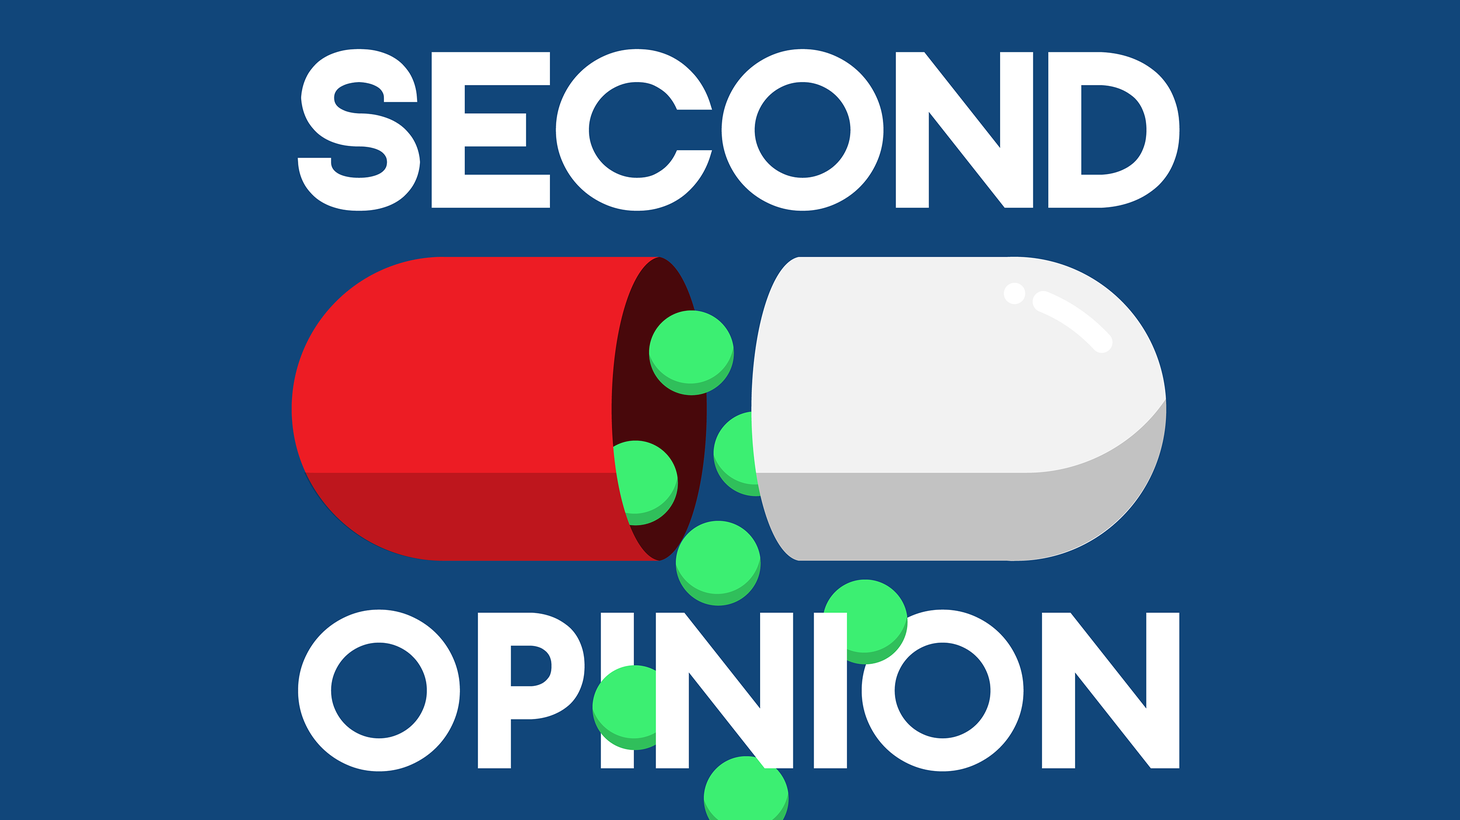 Why did it take so long to change the recommendations about the preventive effects of aspirin?